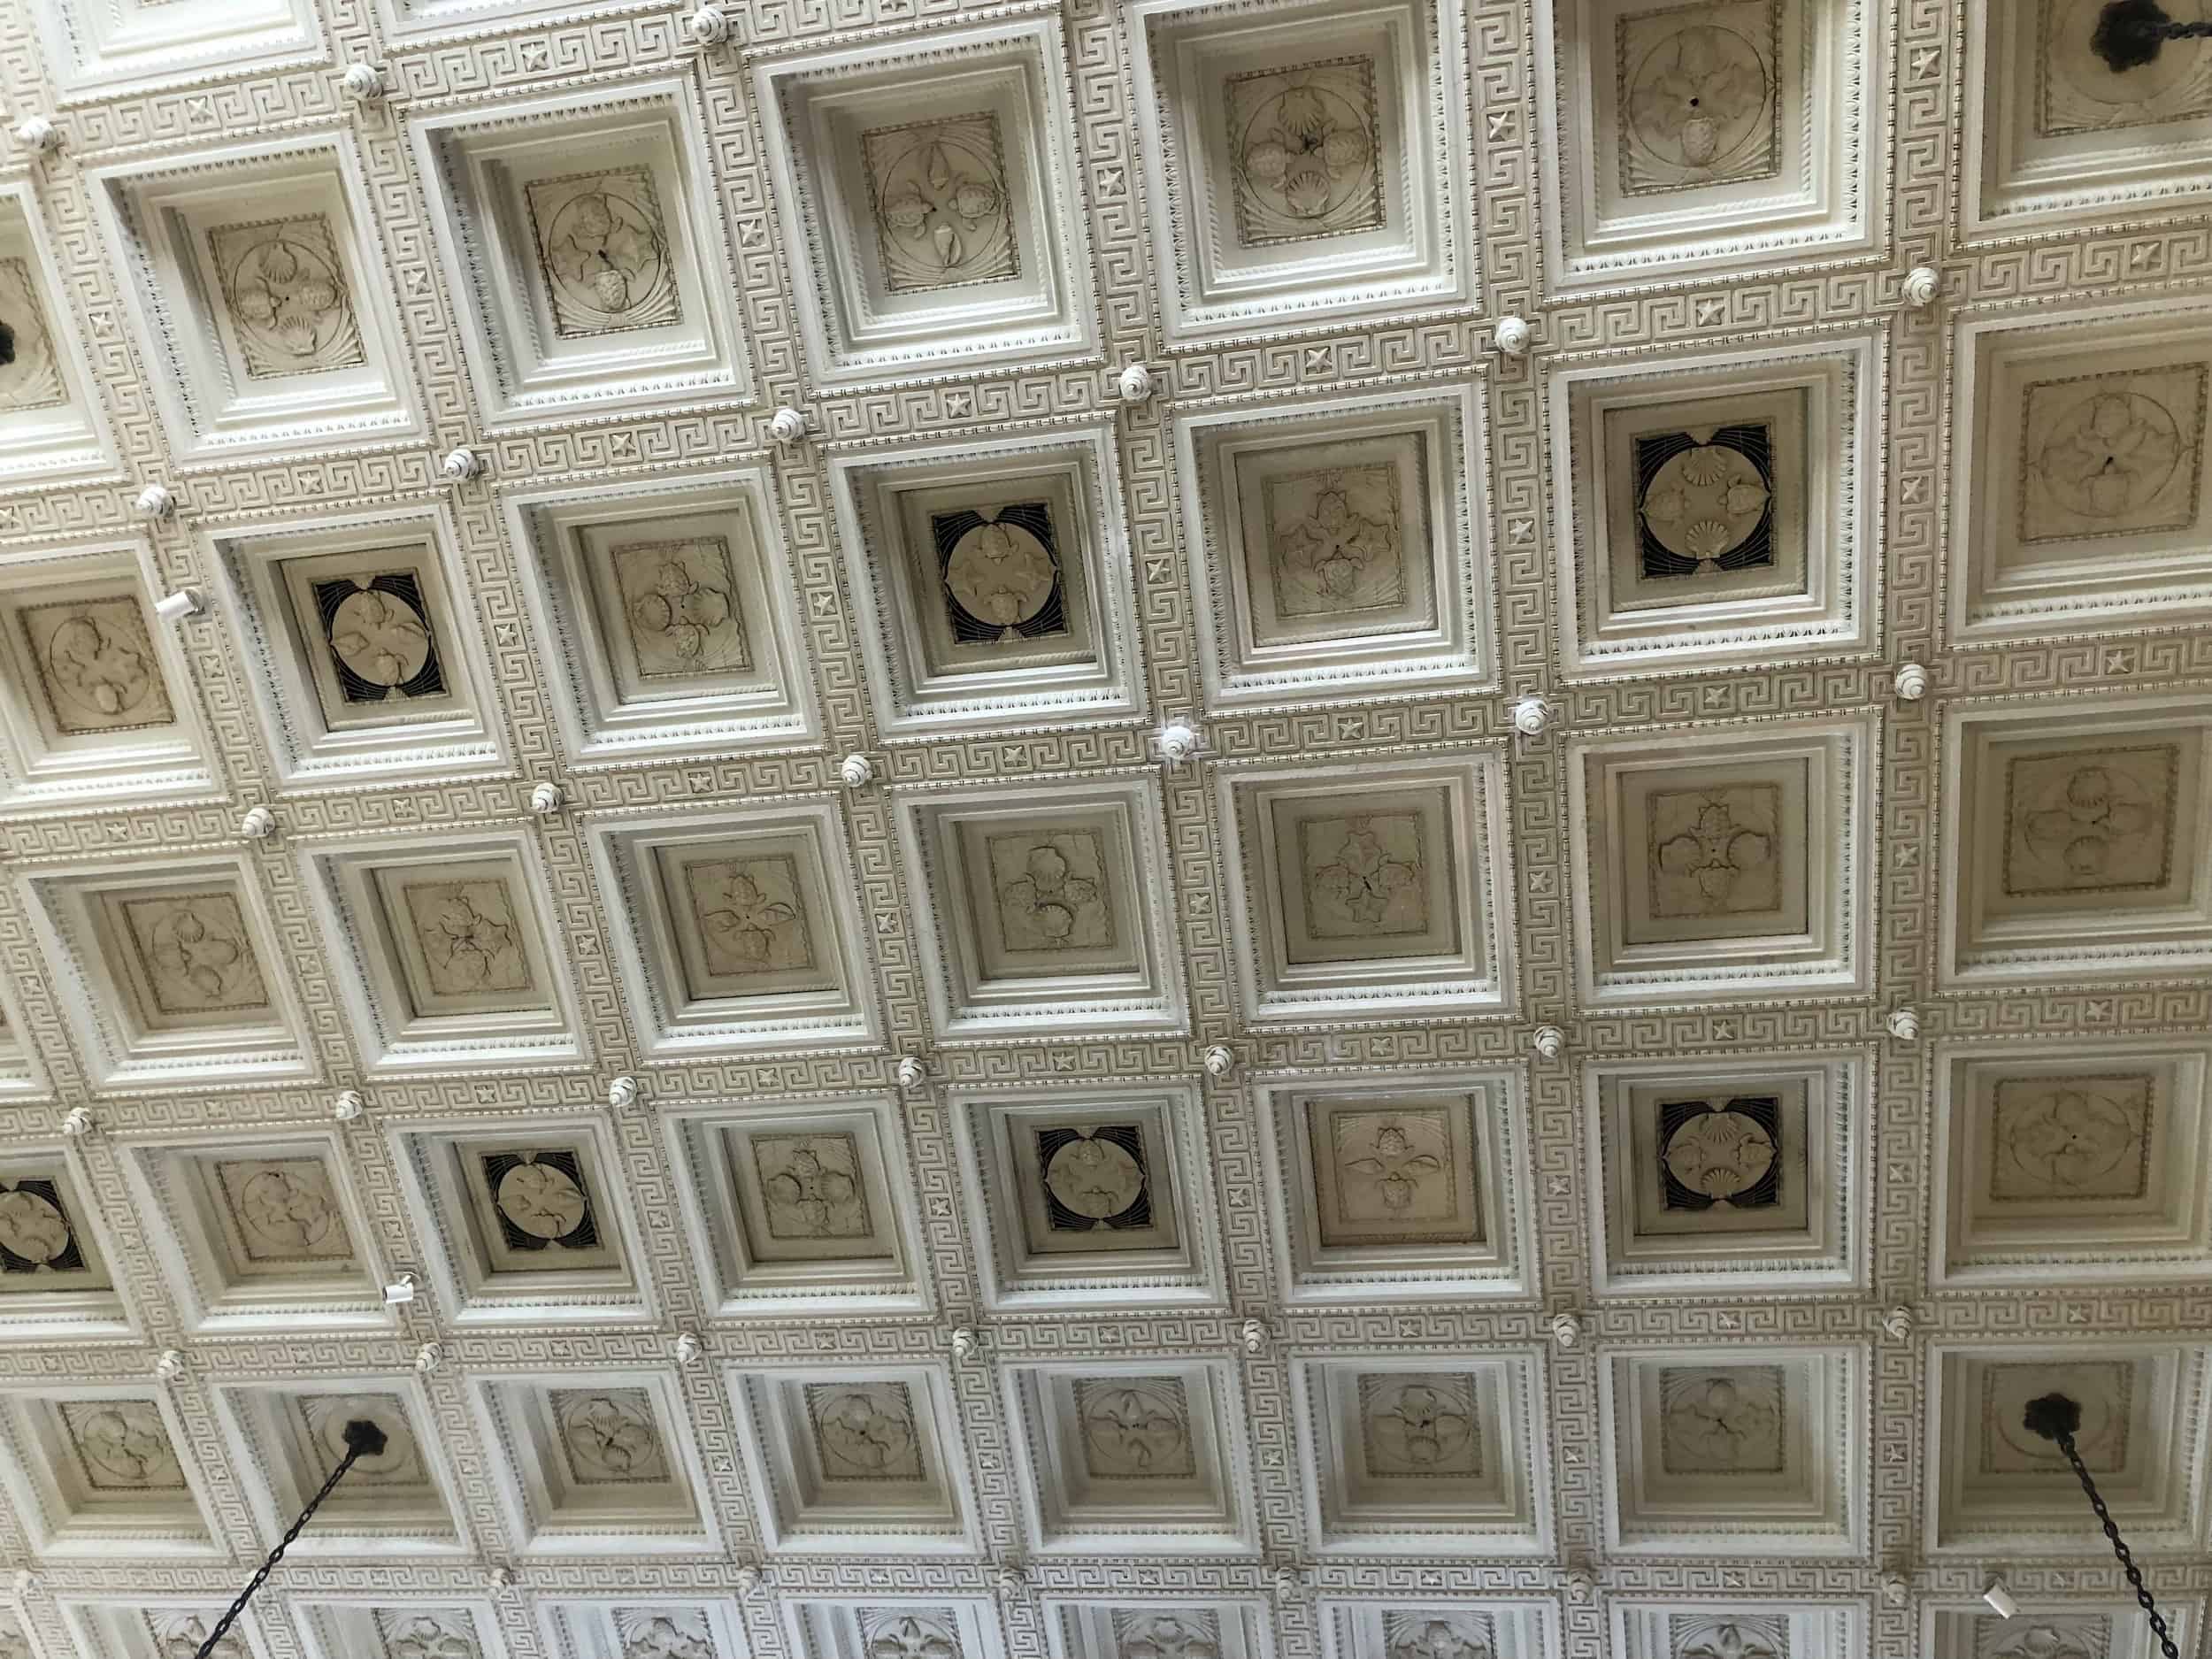 Ceiling of the main lobby